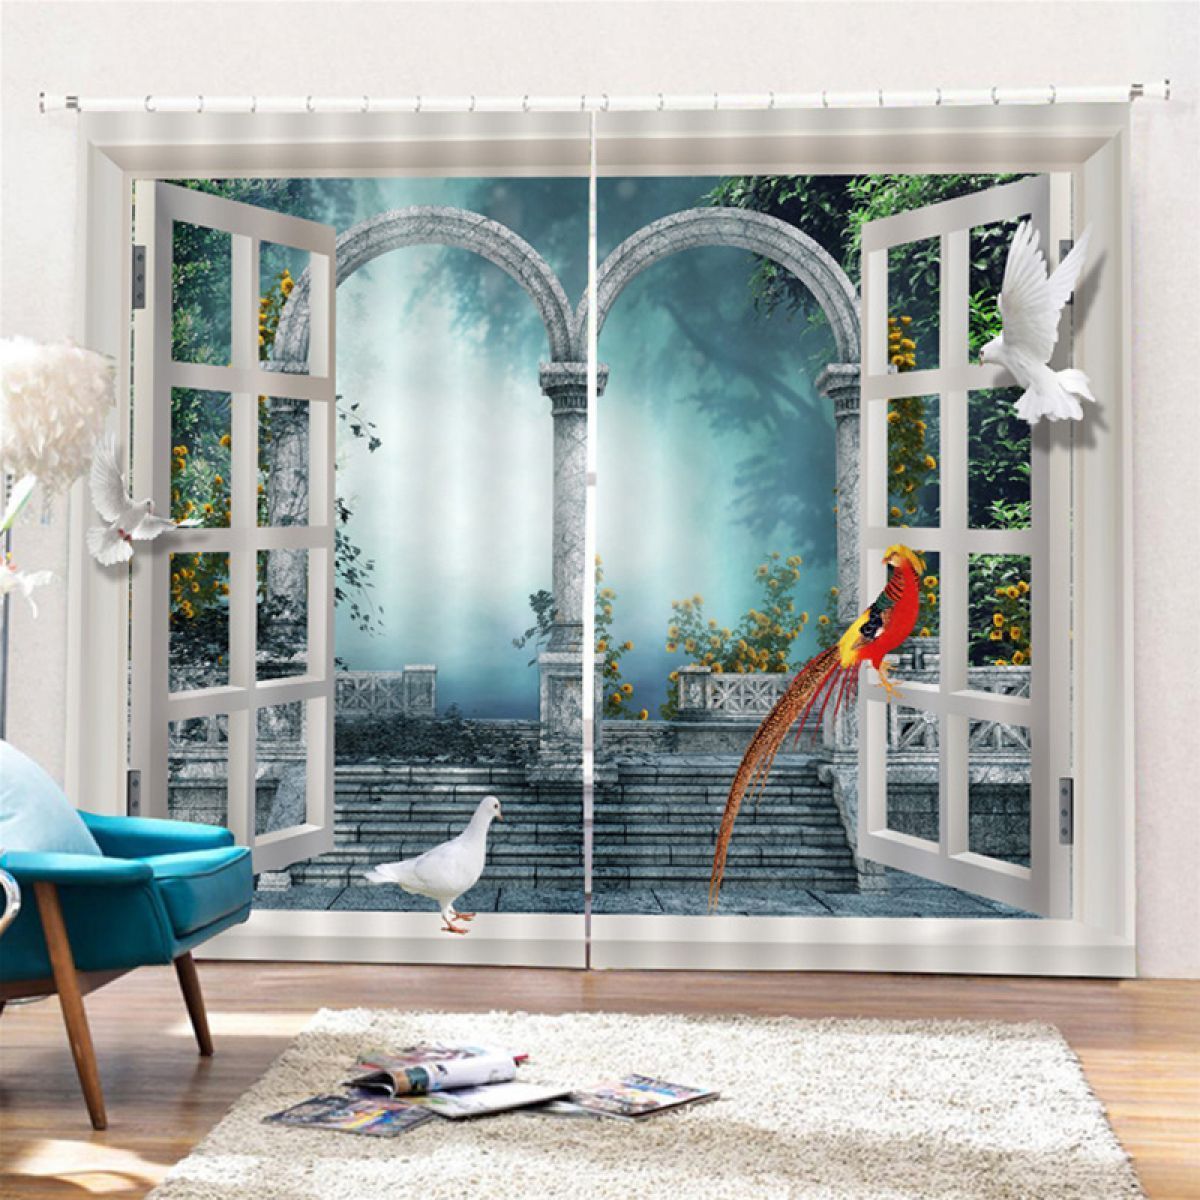 3d Window View Arch Door And Foggy Forest Printed Window Curtain Home Decor